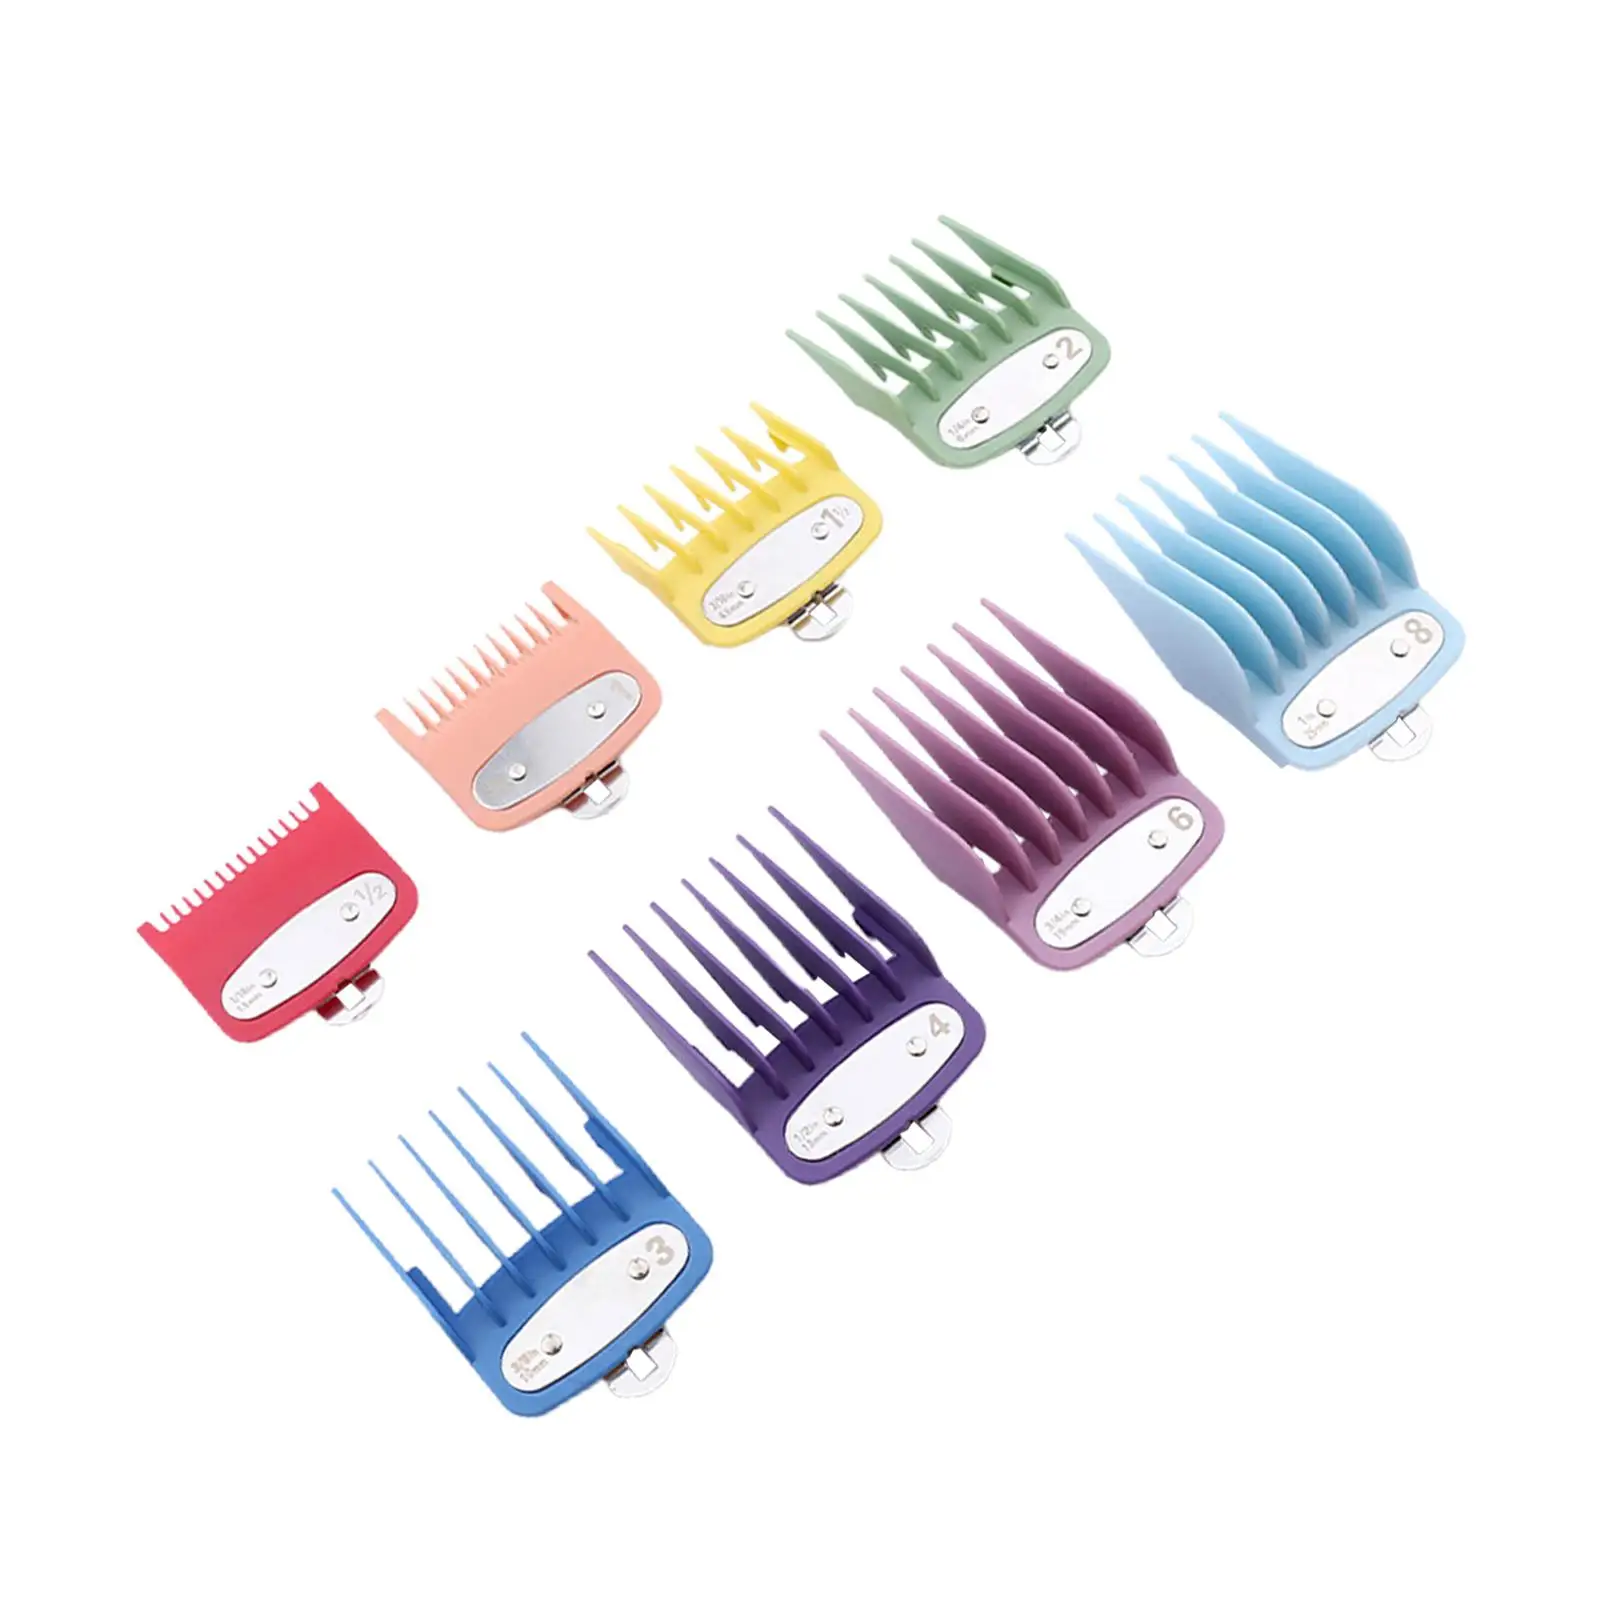 8 Pieces Hair Clipper Guards Professional Attachment Hair Cutting Guide Combs Set for Wahl Hair Clippers Trimmers Barber